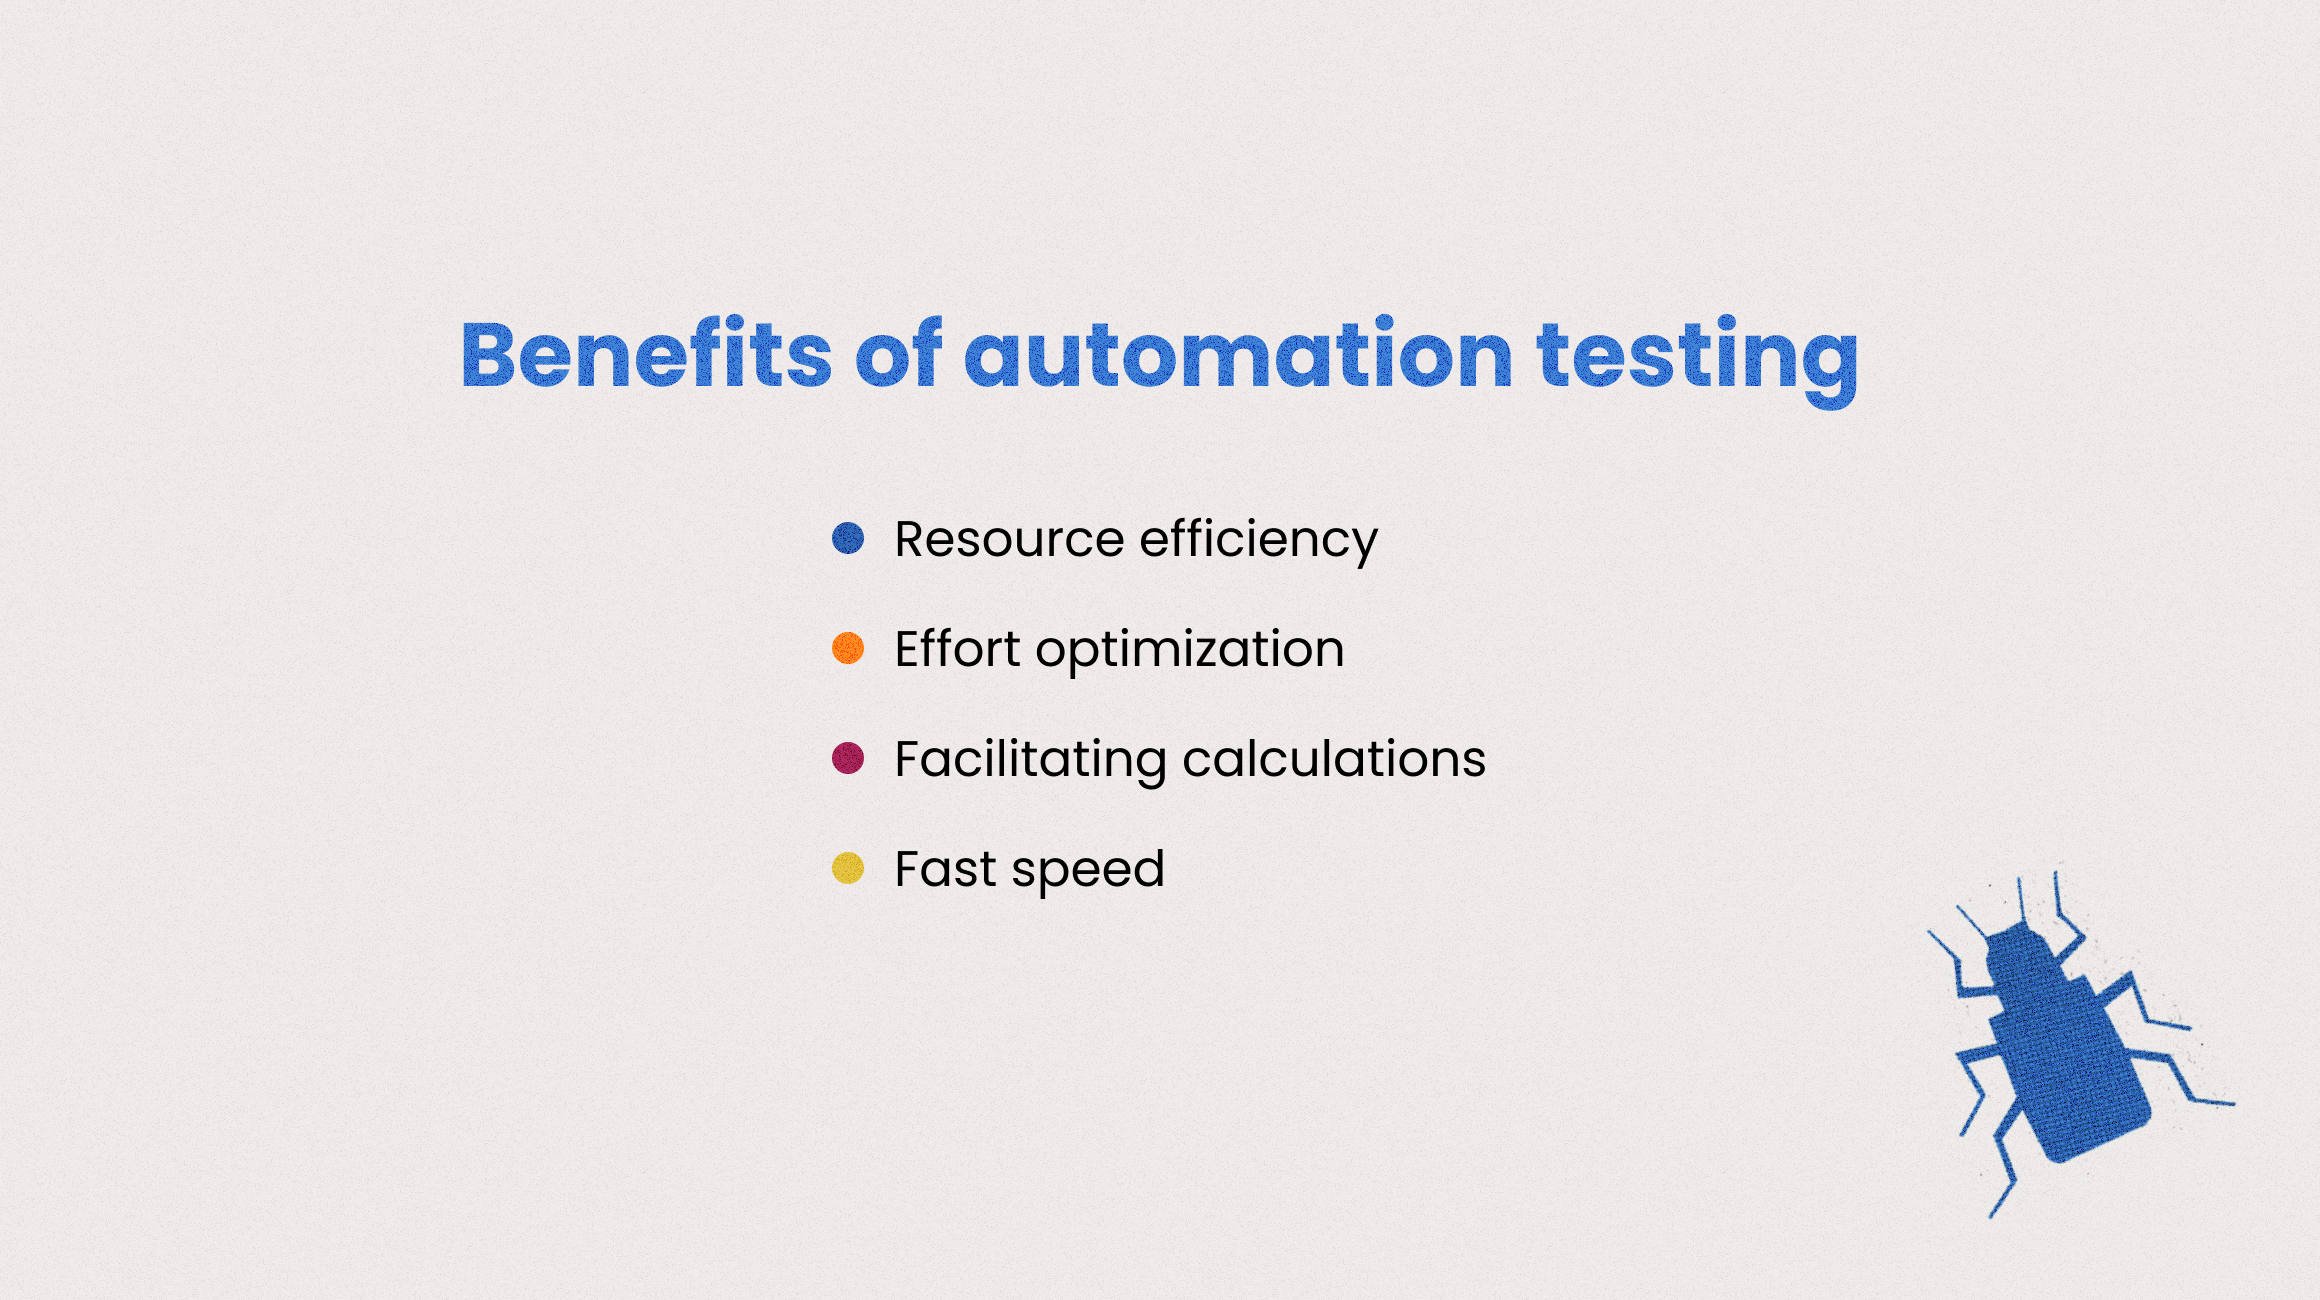 automated or monotonous testing